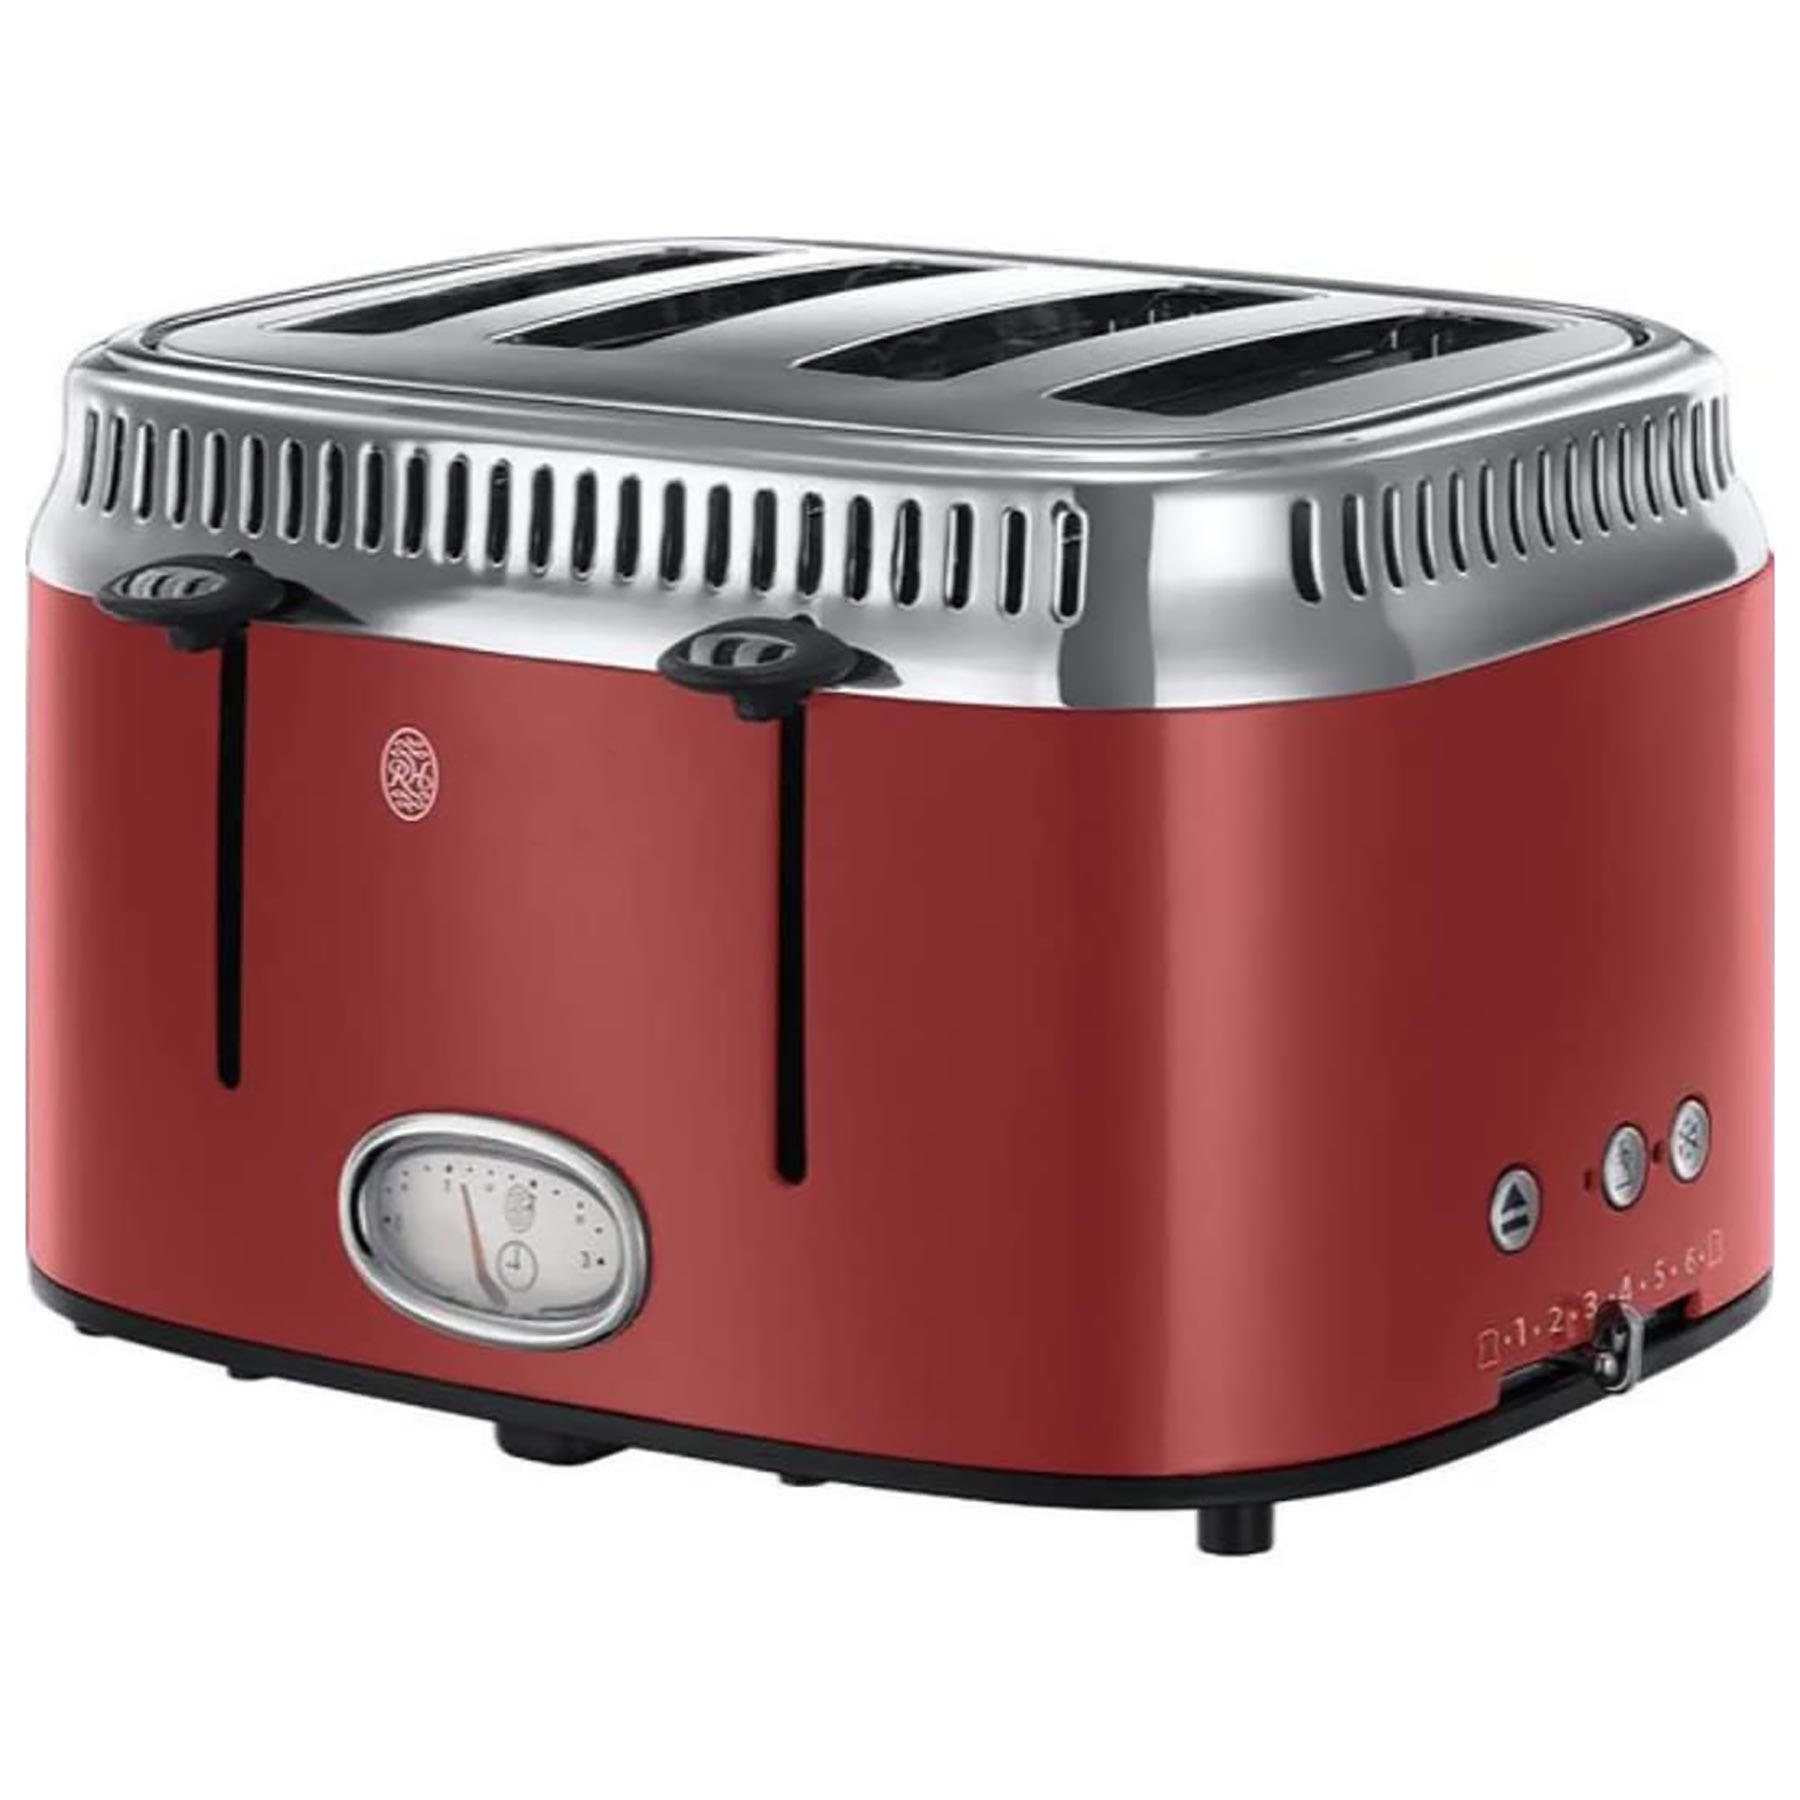 Image of Russell Hobbs 21690 4 Slice Retro Toaster in Red